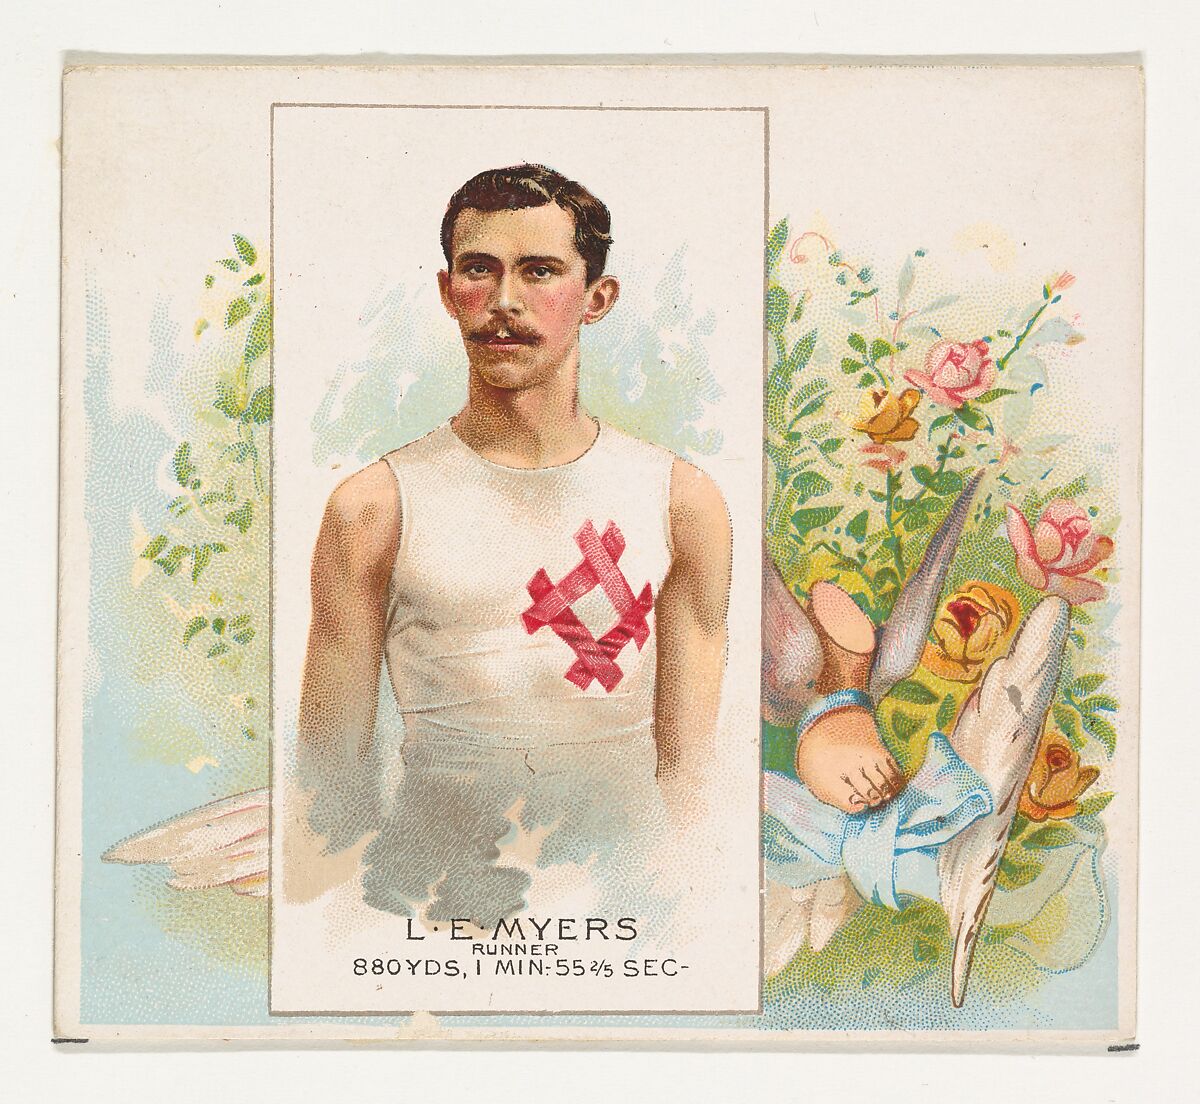 L.E. Meyers, Runner, from World's Champions, Second Series (N43) for Allen & Ginter Cigarettes, Allen &amp; Ginter (American, Richmond, Virginia), Commercial lithograph 